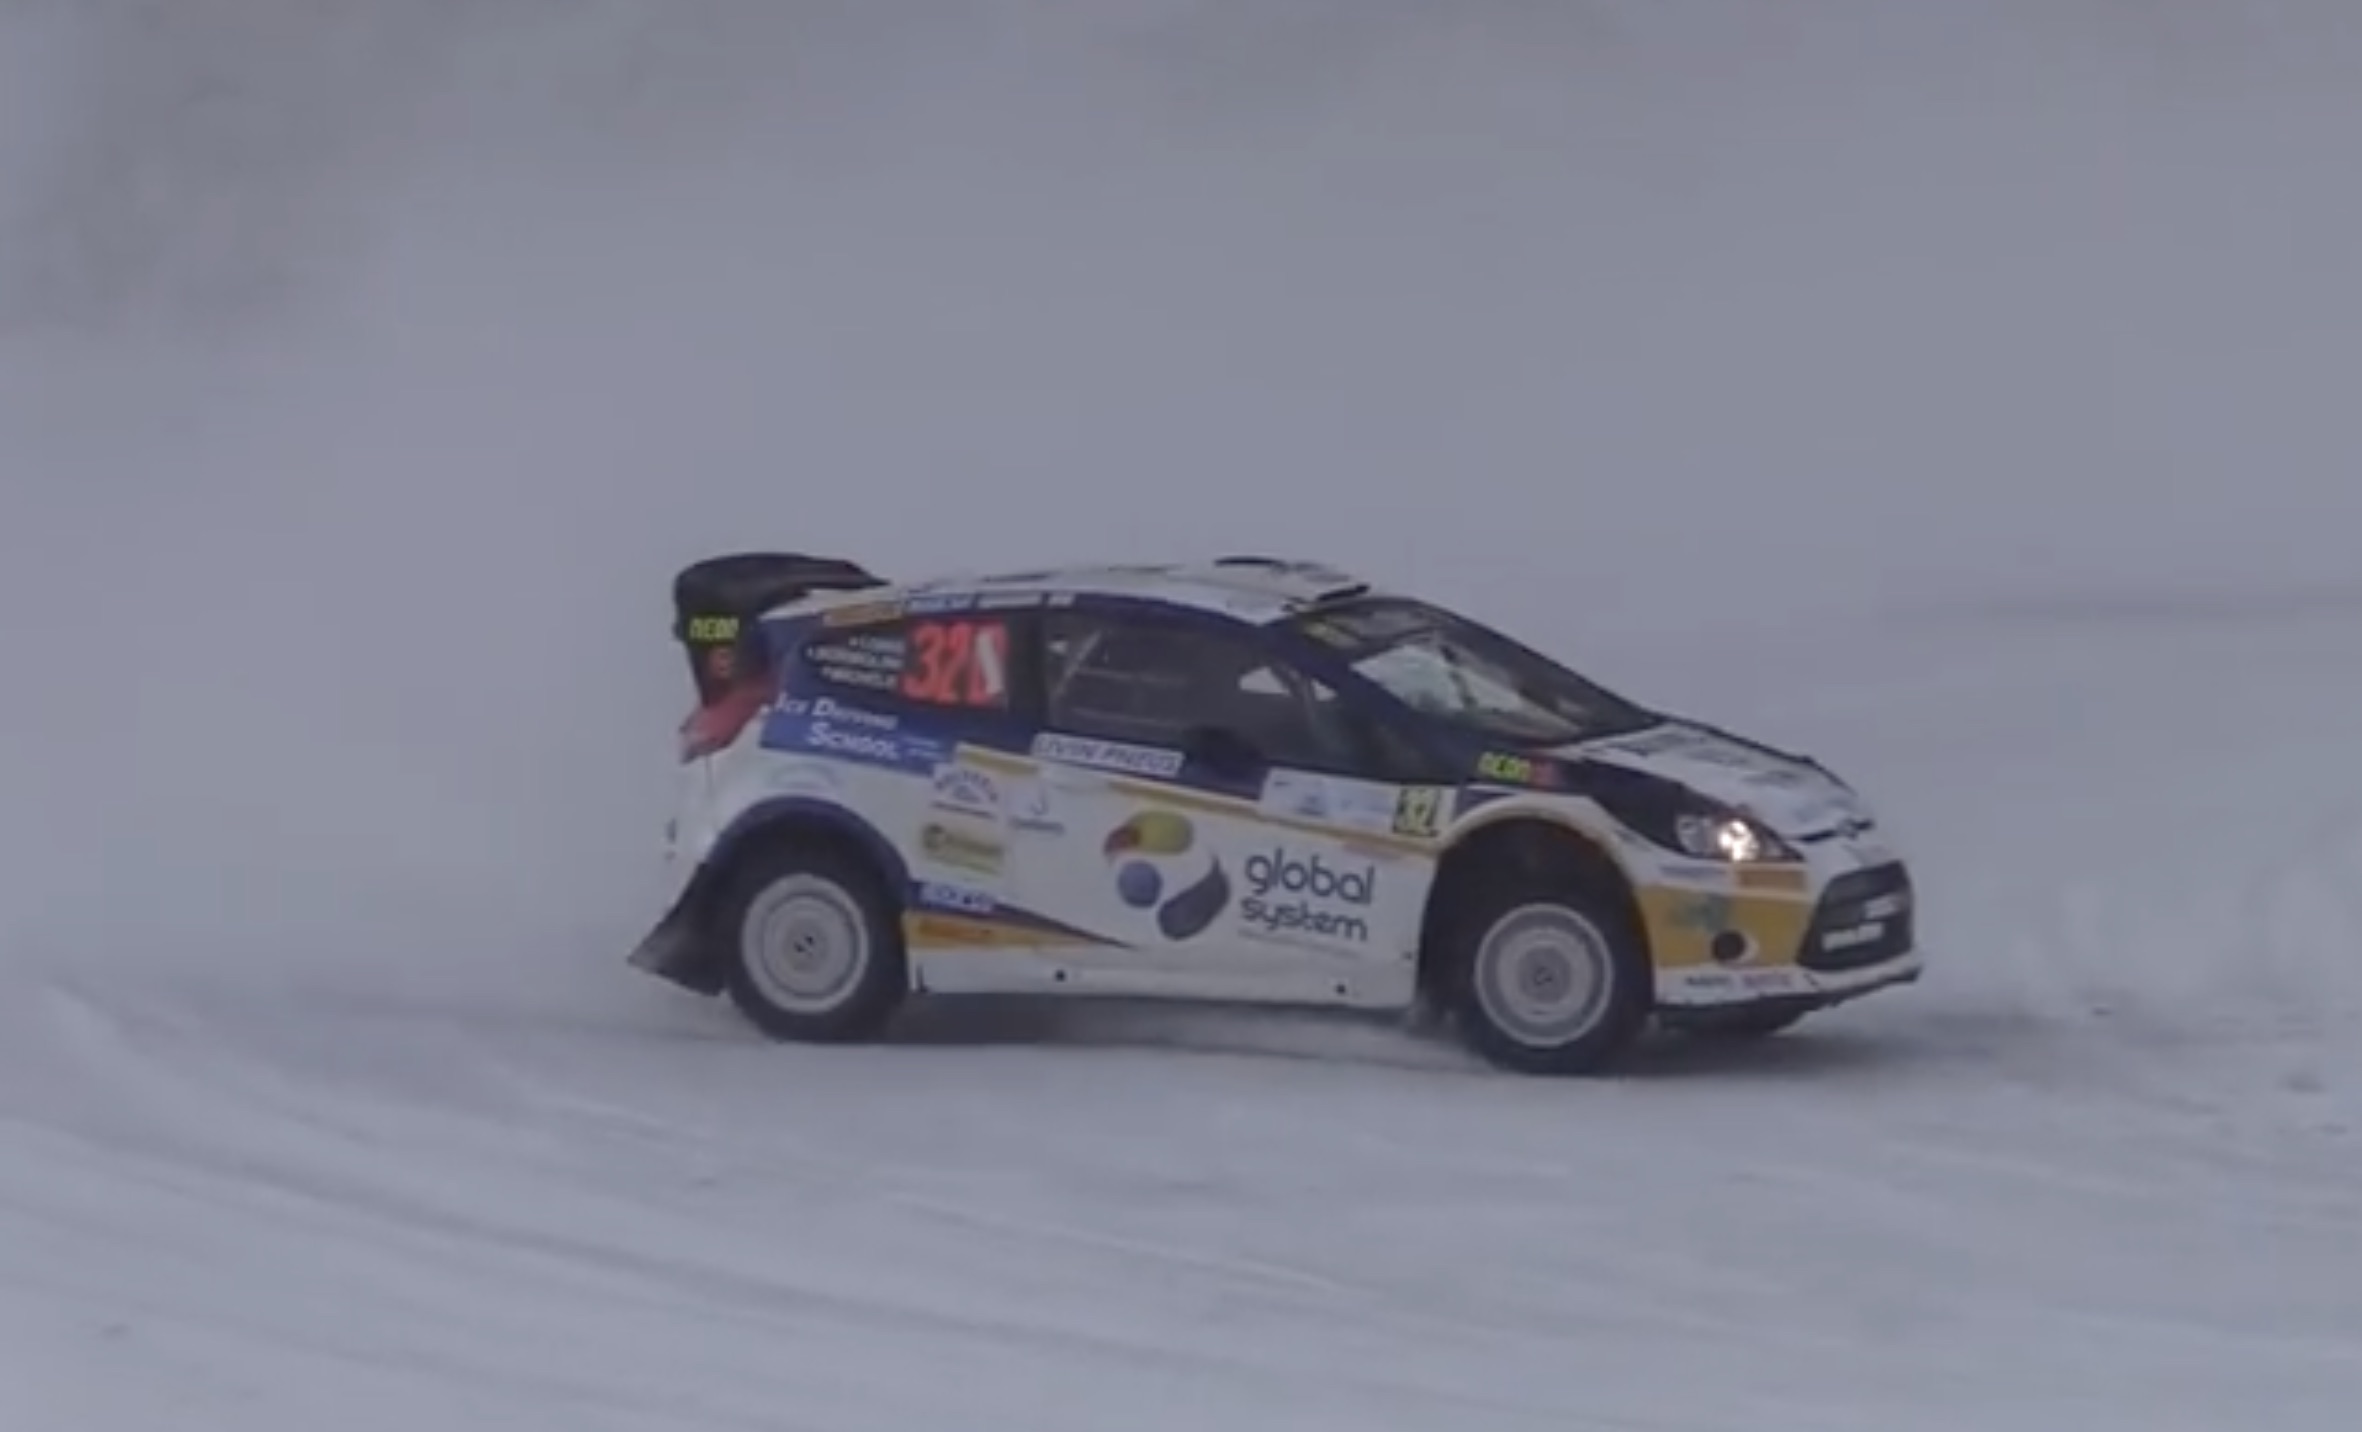 Morning Symphony: Retired Rally Cars On Snow! Watch As A Ford Focus RS, Ford Fiesta WRC And Peugeot 206 Go Play!